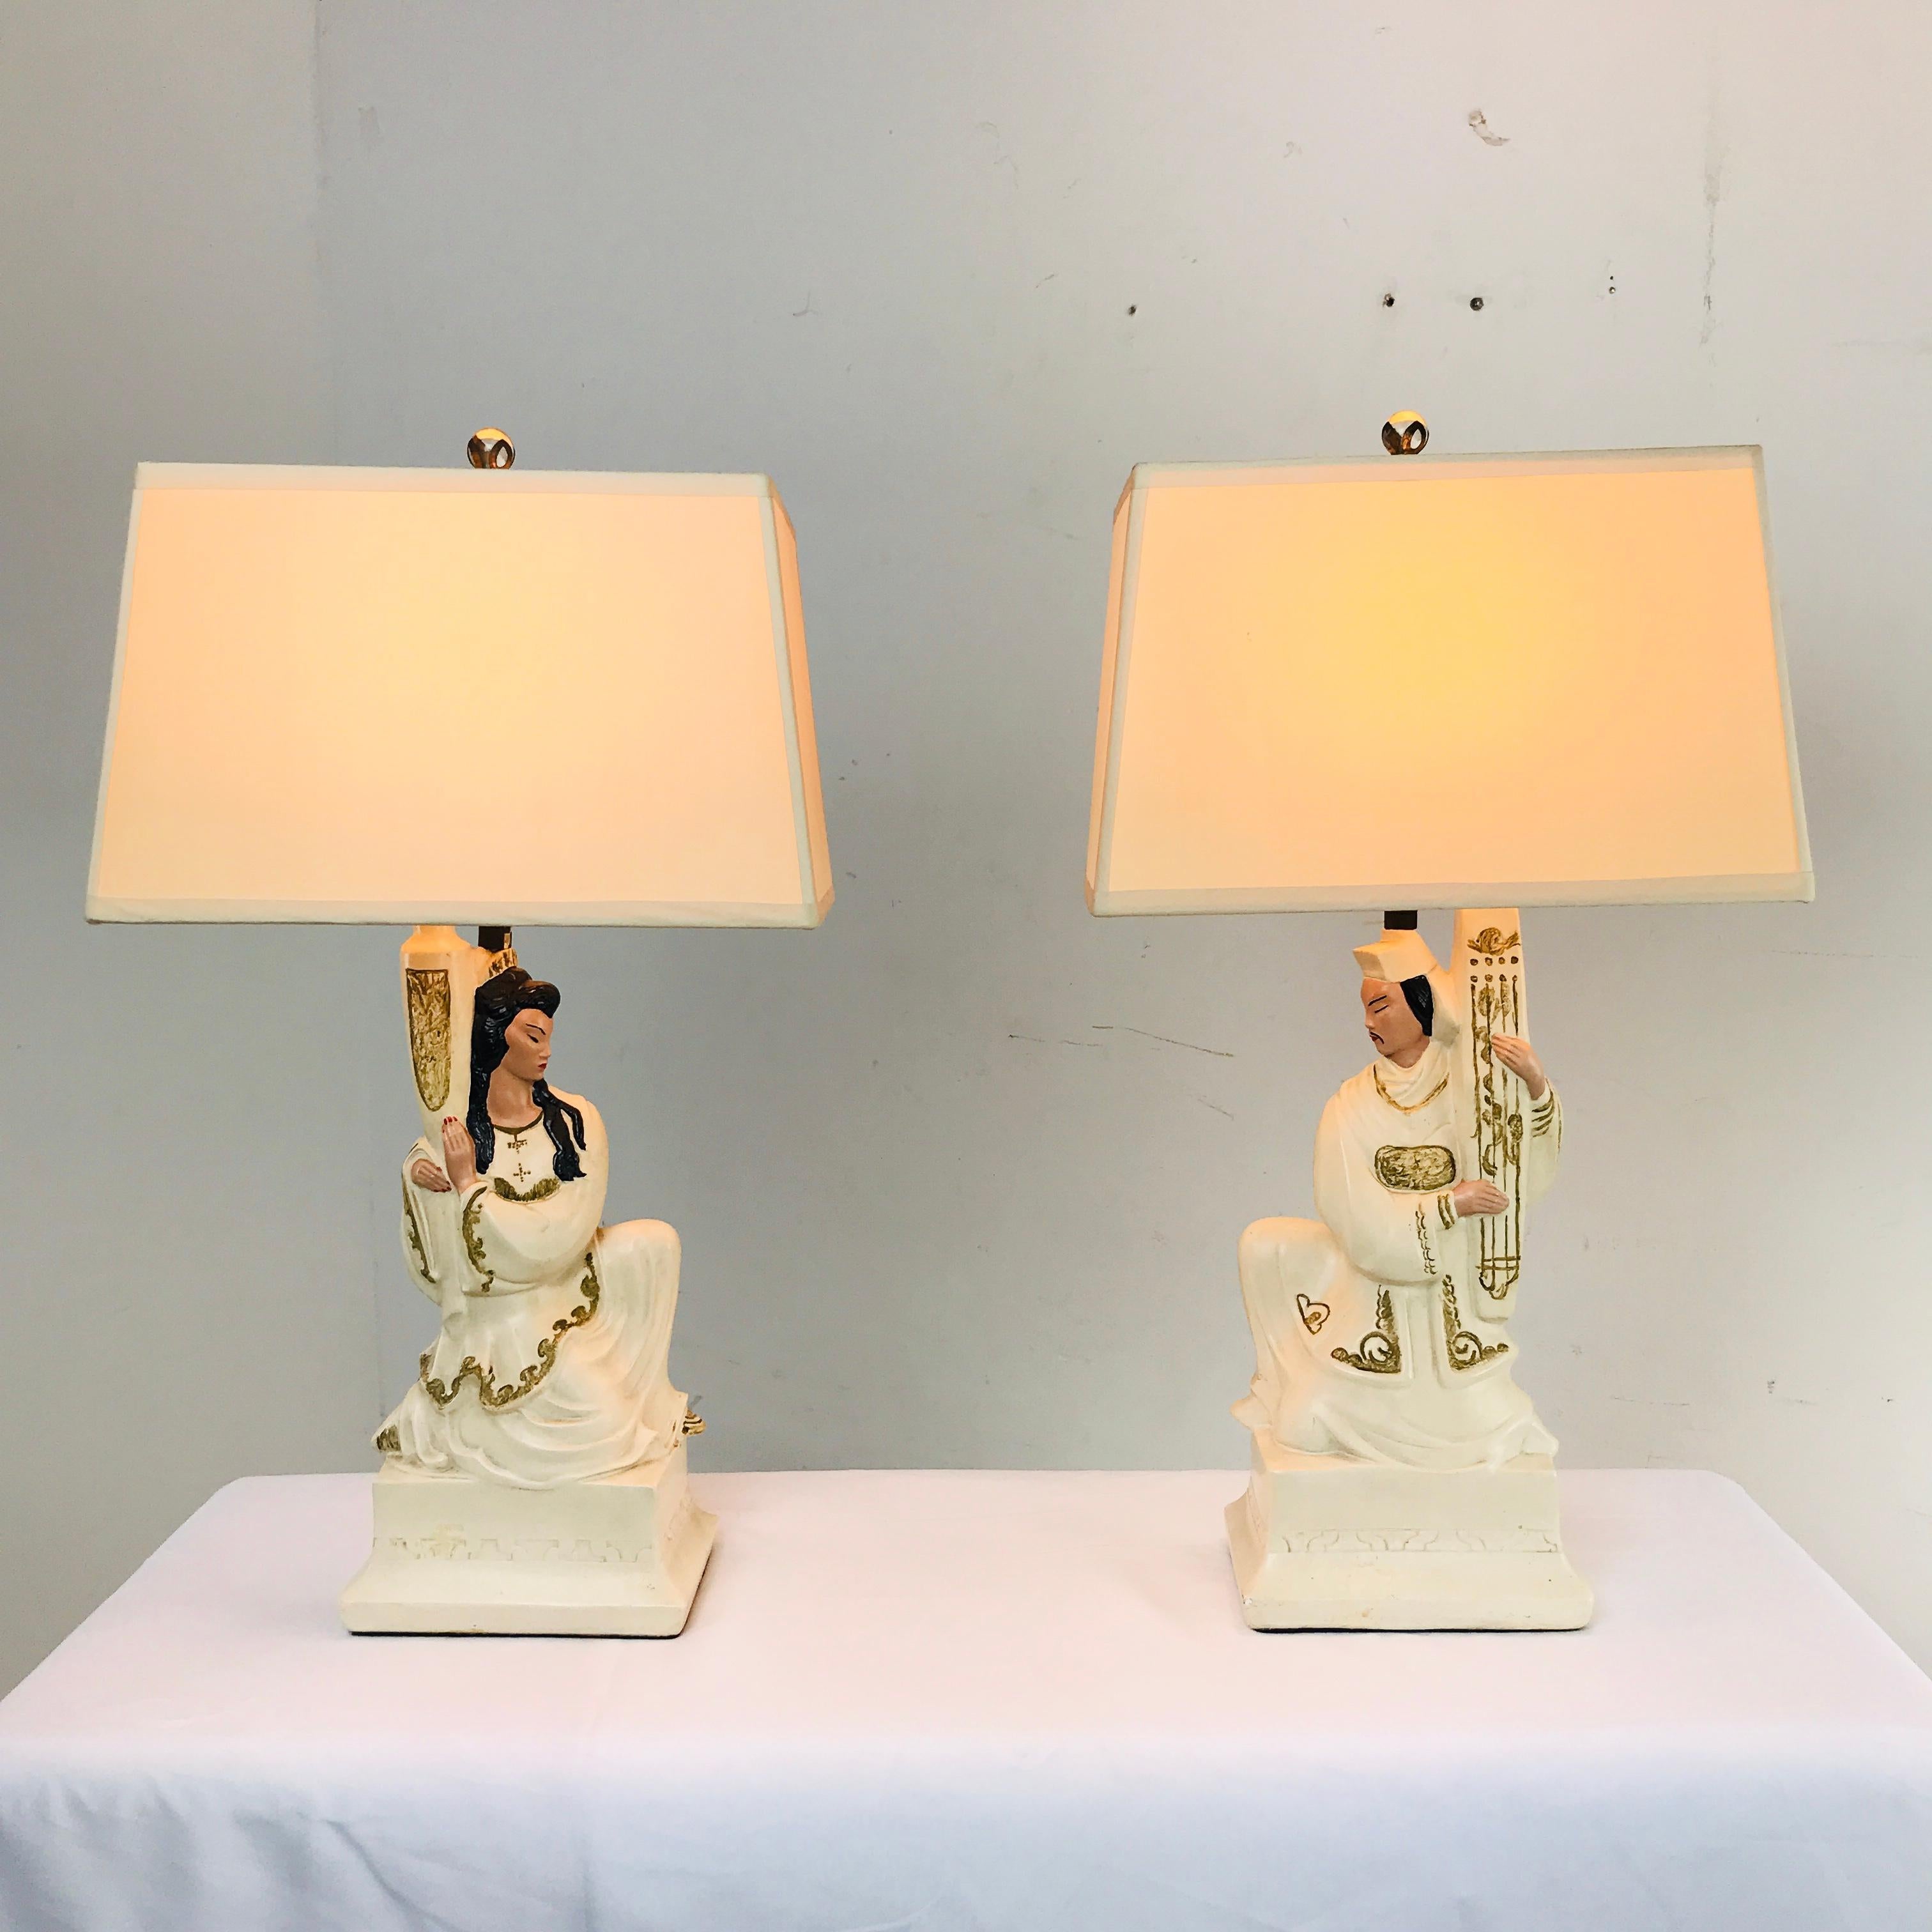 Lamps professionally restored and rewired with custom shades. Whimsical and fun.